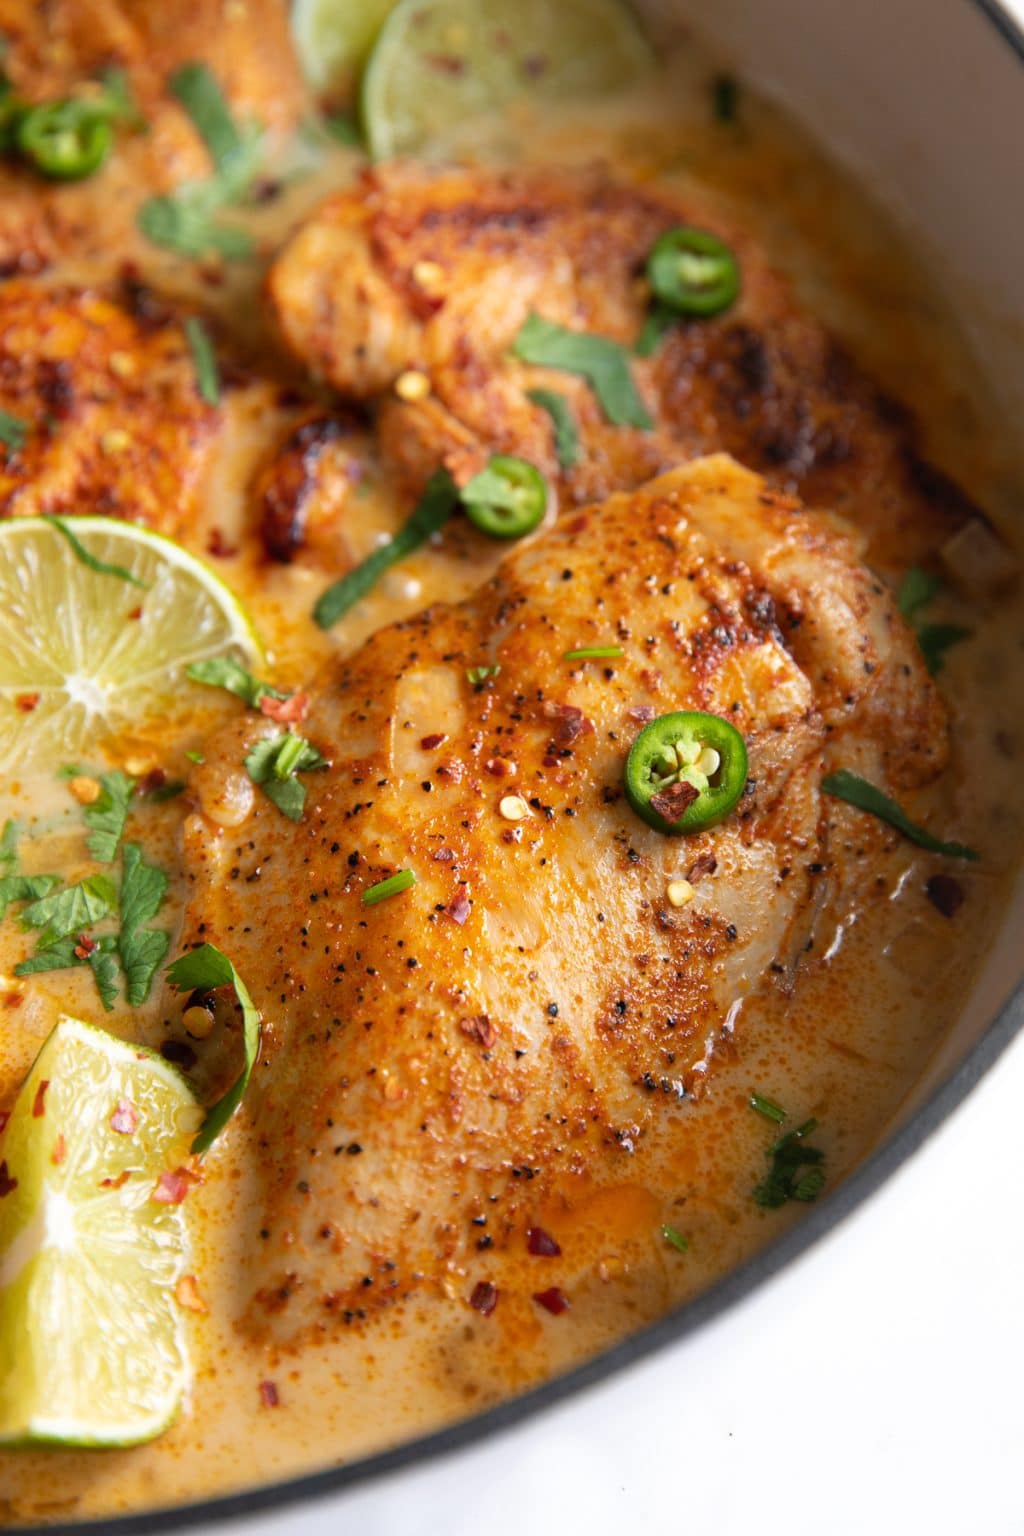 Creamy Coconut Milk Chicken Recipe One Skillet The Forked Spoon